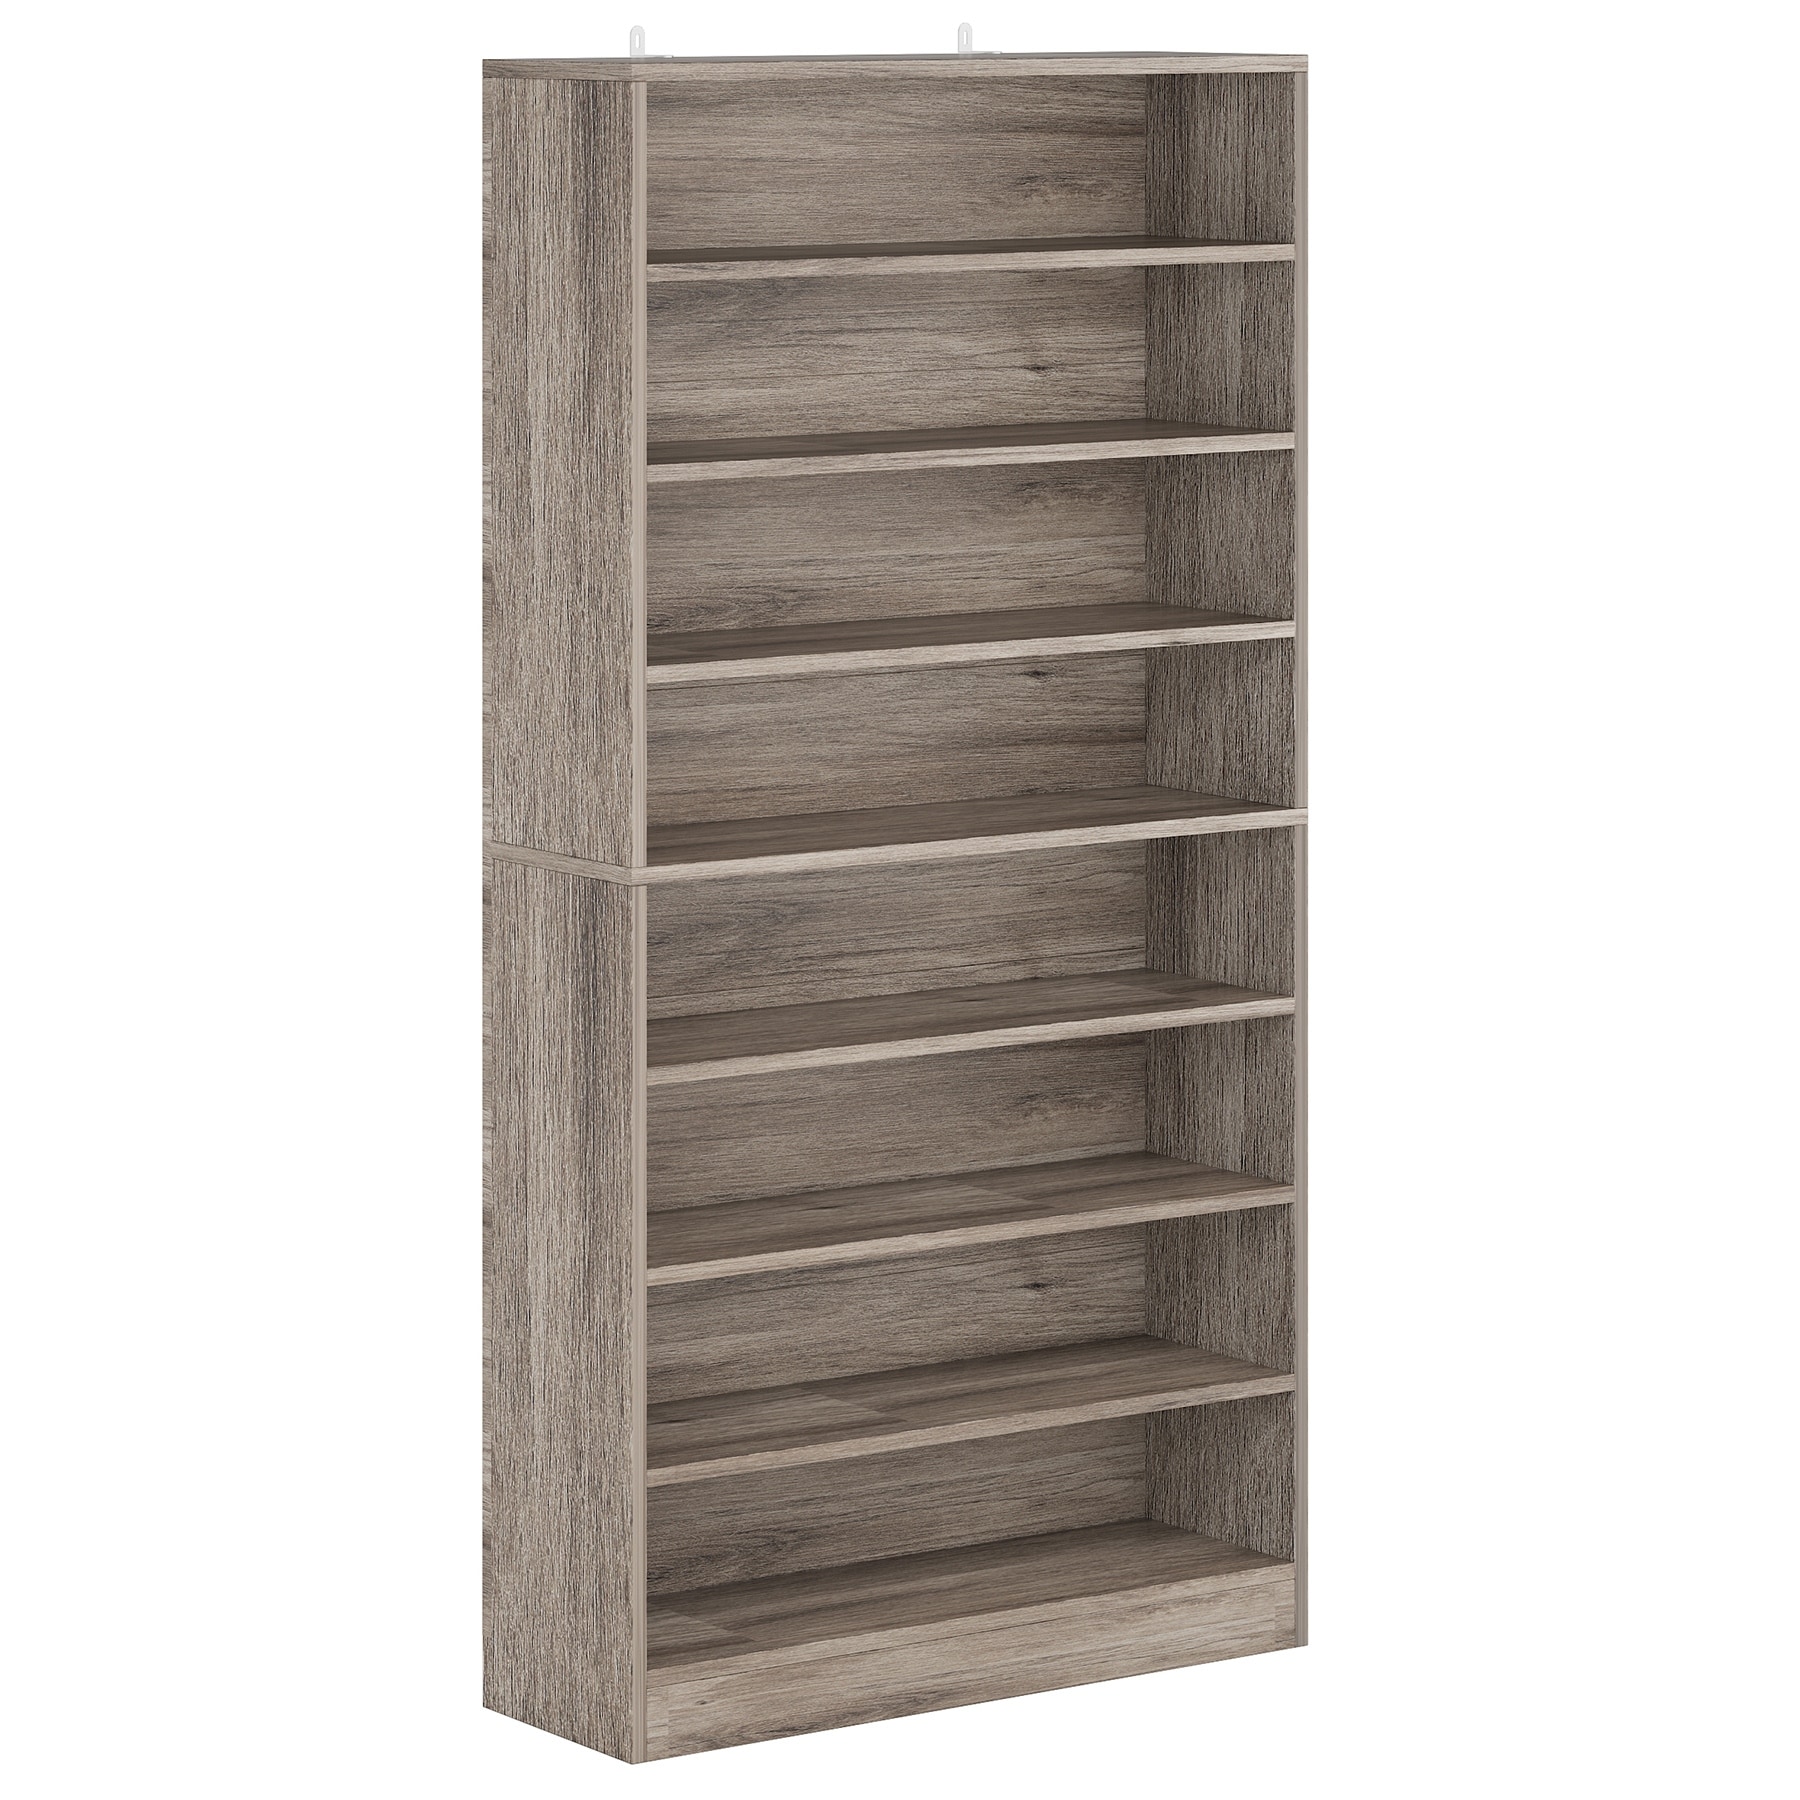 https://ak1.ostkcdn.com/images/products/is/images/direct/4aba9f4749376e0b055367a1fc27ab0bebf2143f/Shoe-Cabinet%2C9-Tiers-Tall-Shoes-Storage-Rack-Cabinets%2CWood-Shoe-Stand-with-Open-Shelf-for-Entryway.jpg